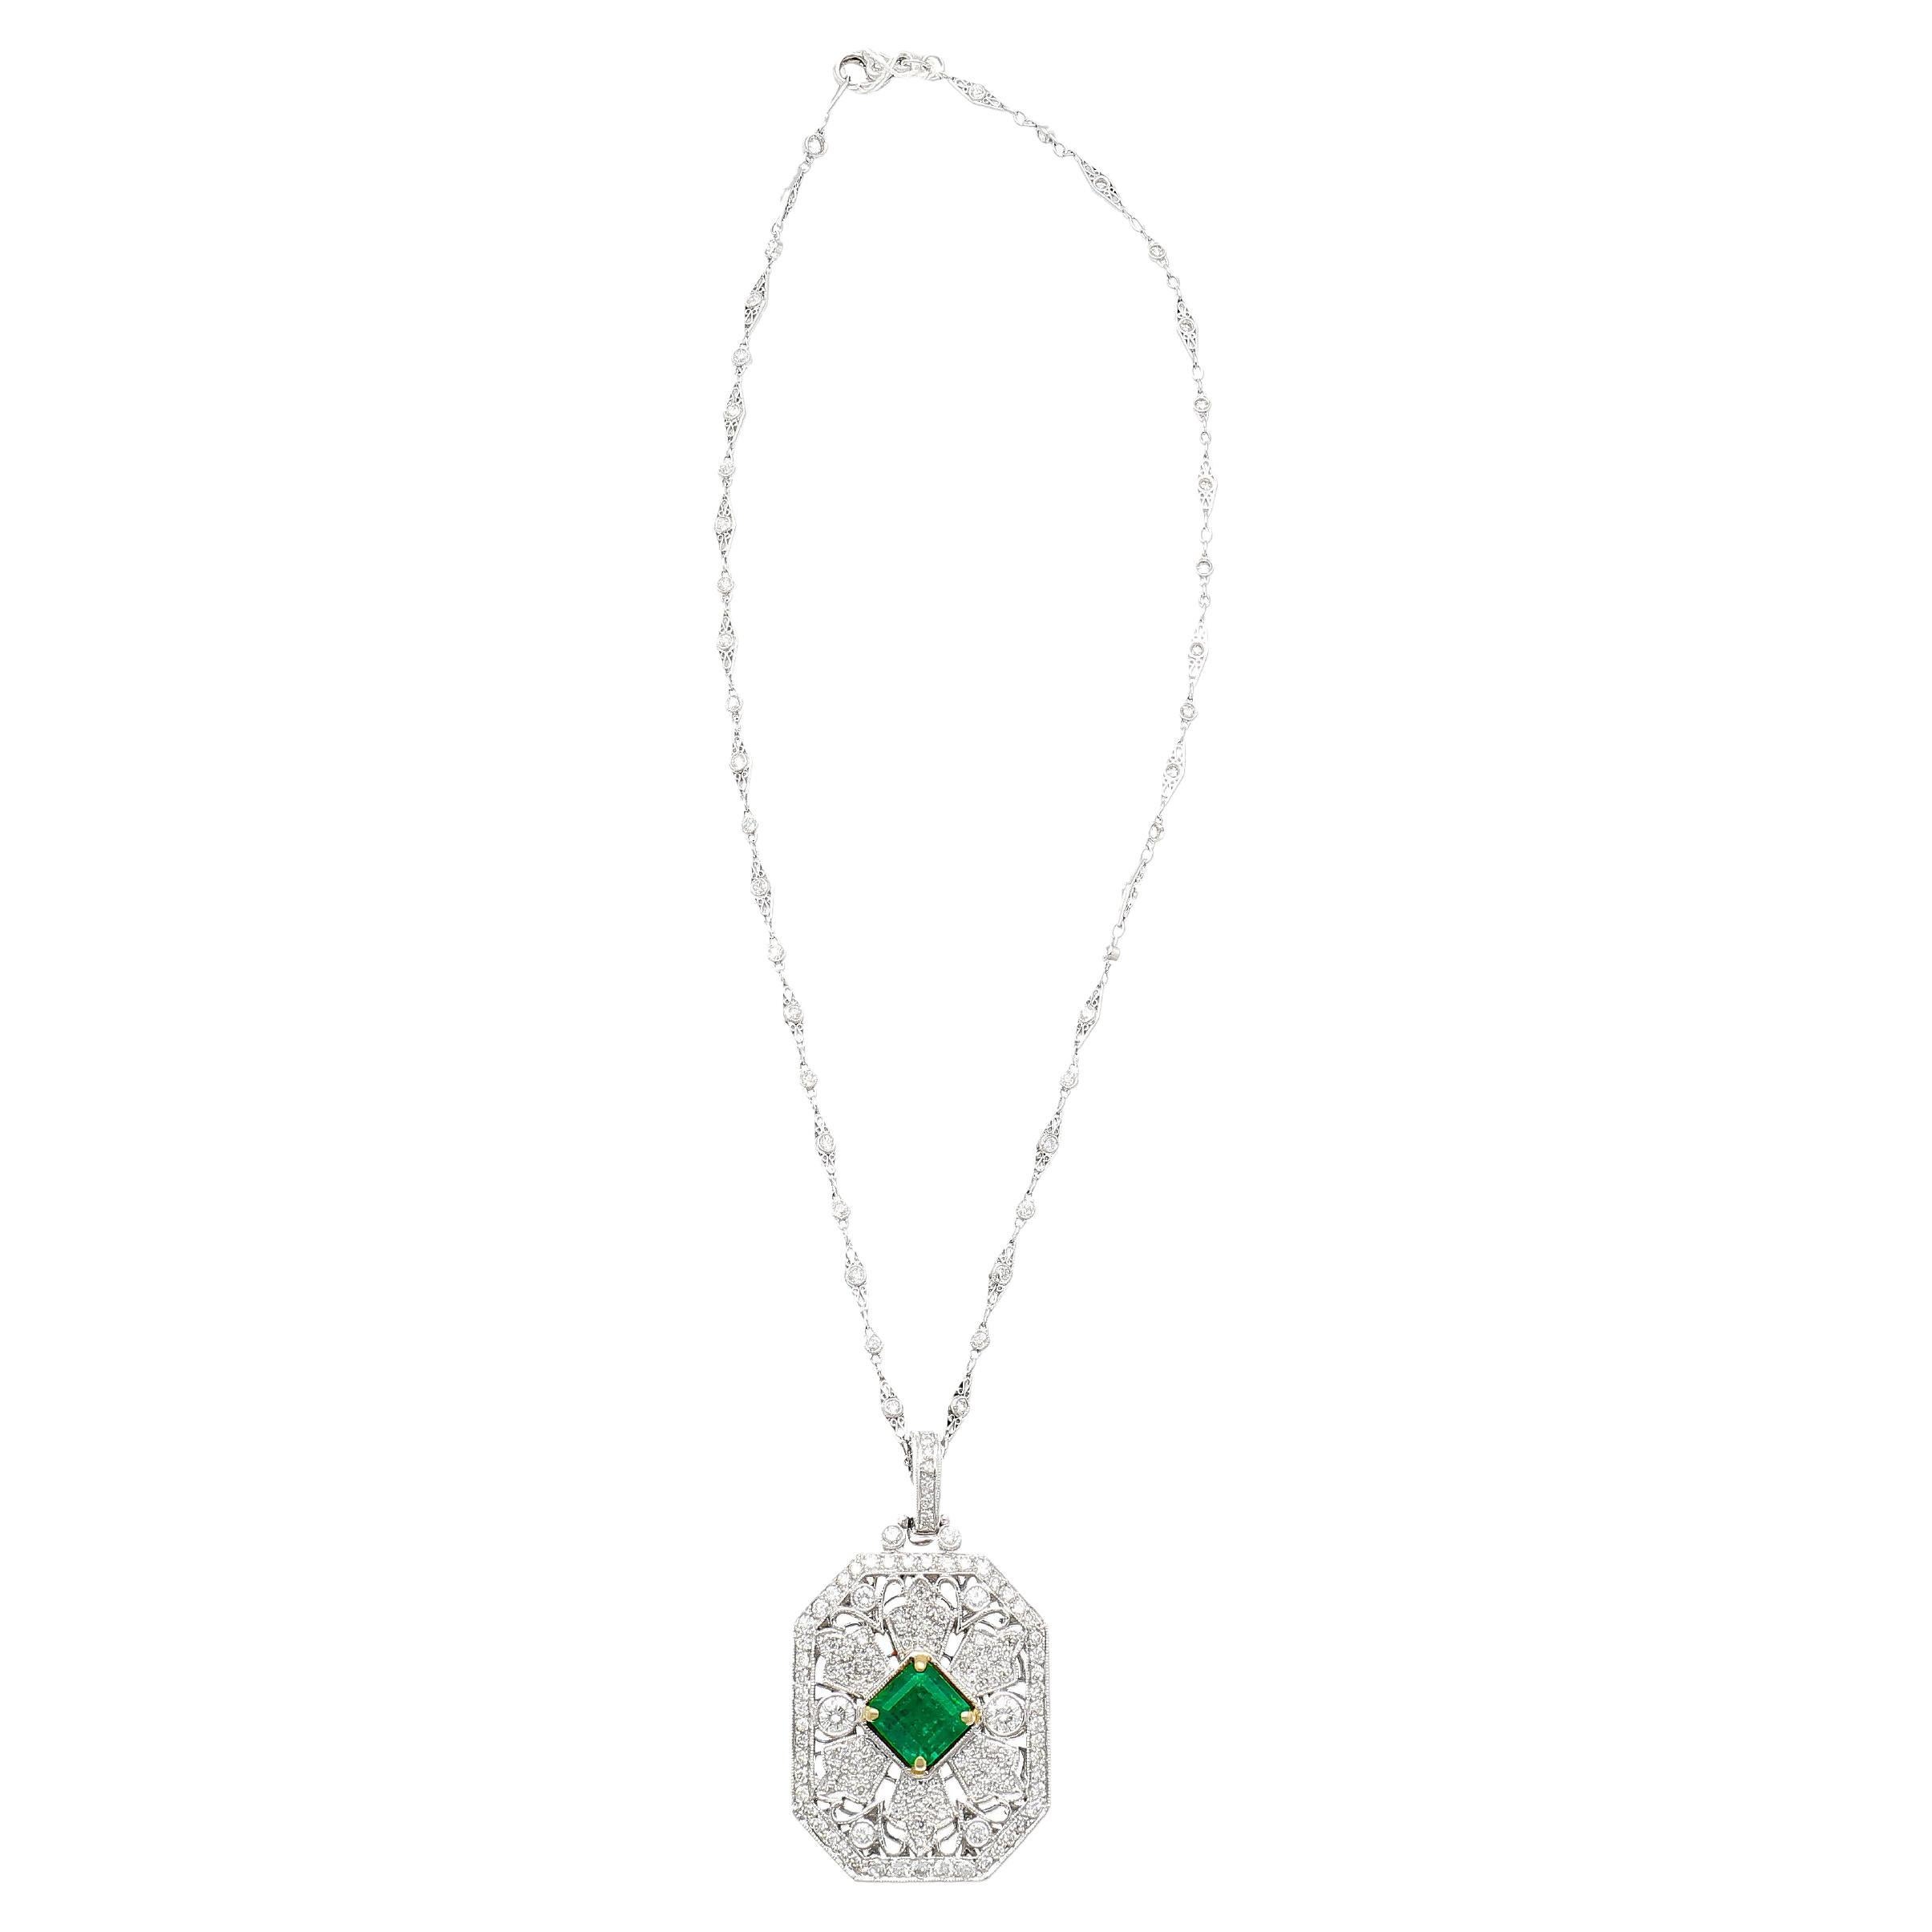 Upgrade to luxury with this enchanting pendant necklace. Expertly crafted, this piece showcases a breathtaking GRS certified vivid green emerald with minor oil treatment. Intricately carved Art Deco style with a catching design. All set in reliable